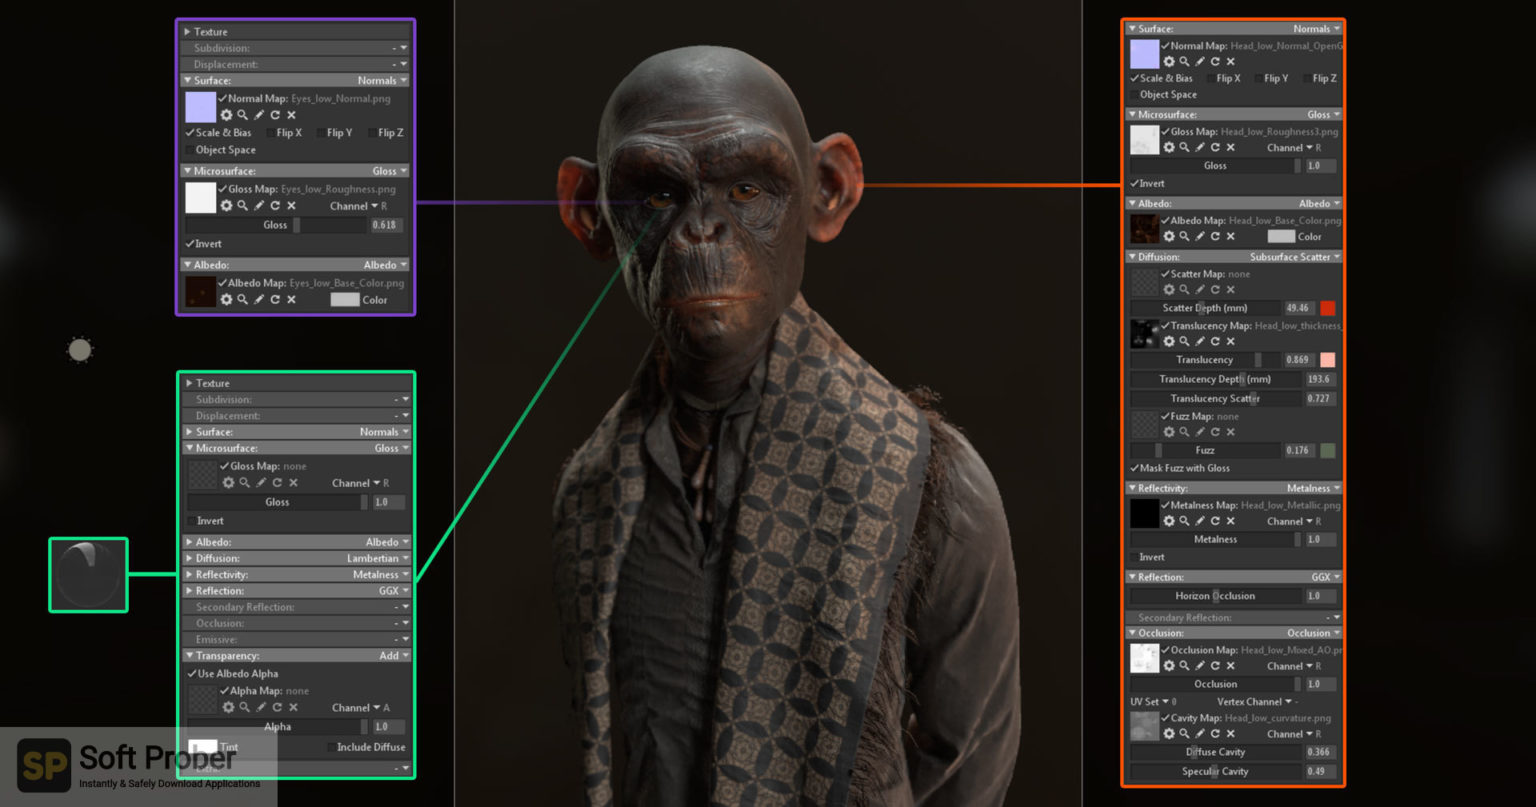 instal the new version for mac Marmoset Toolbag 4.0.6.3